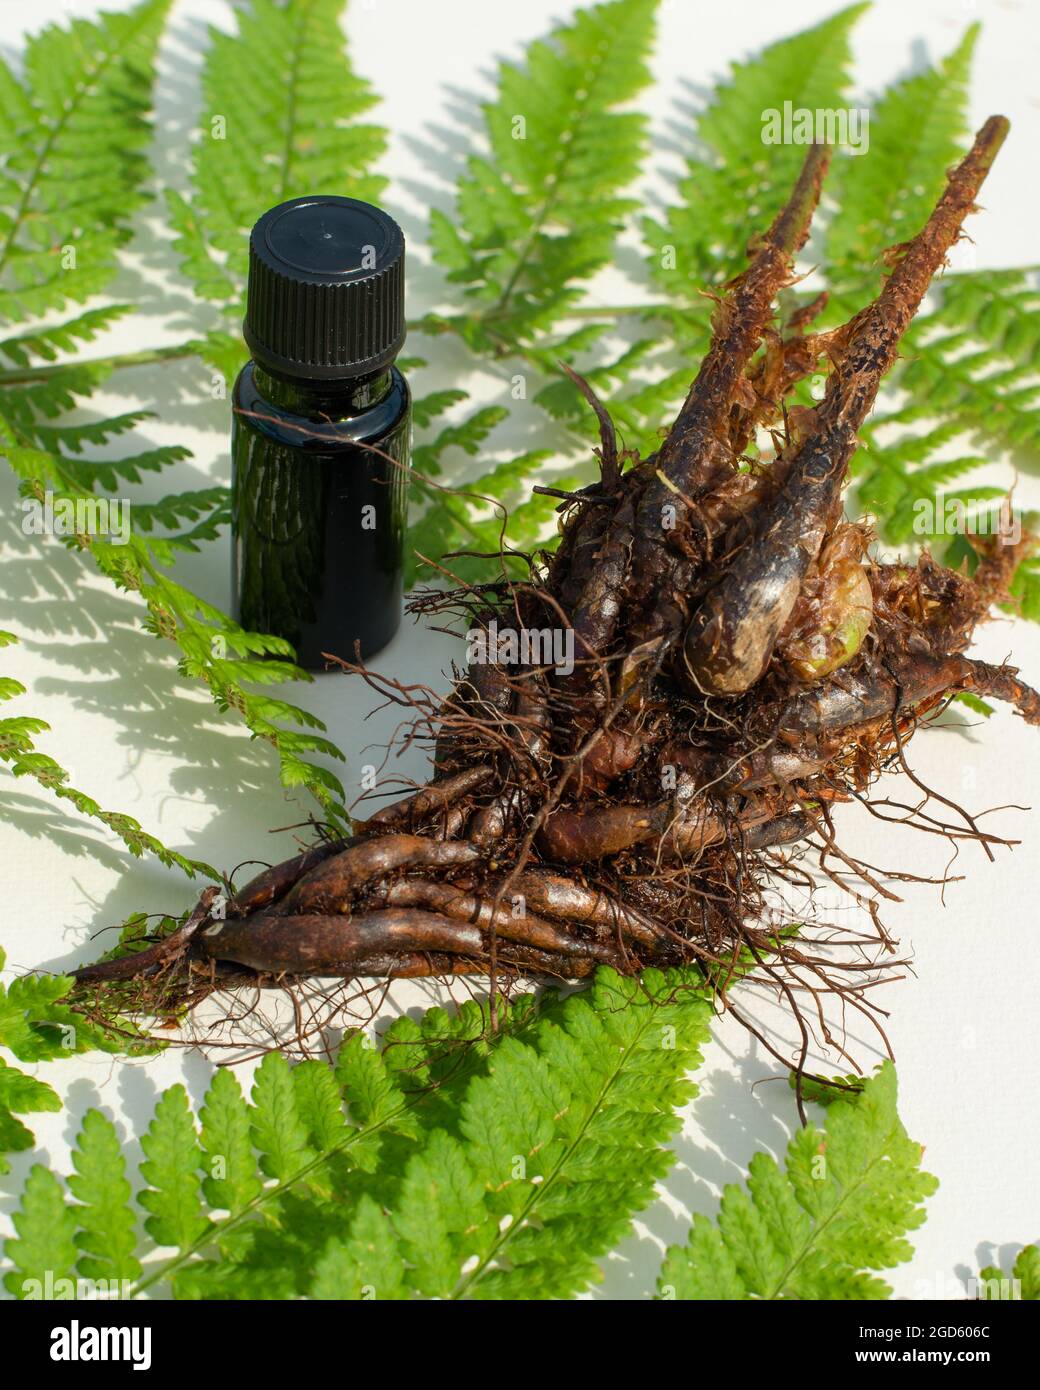 Extract from leaves, stems and roots of Wood fern, Dryopteris erythrosora. Male Fern leaves and roots close up. Stock Photo